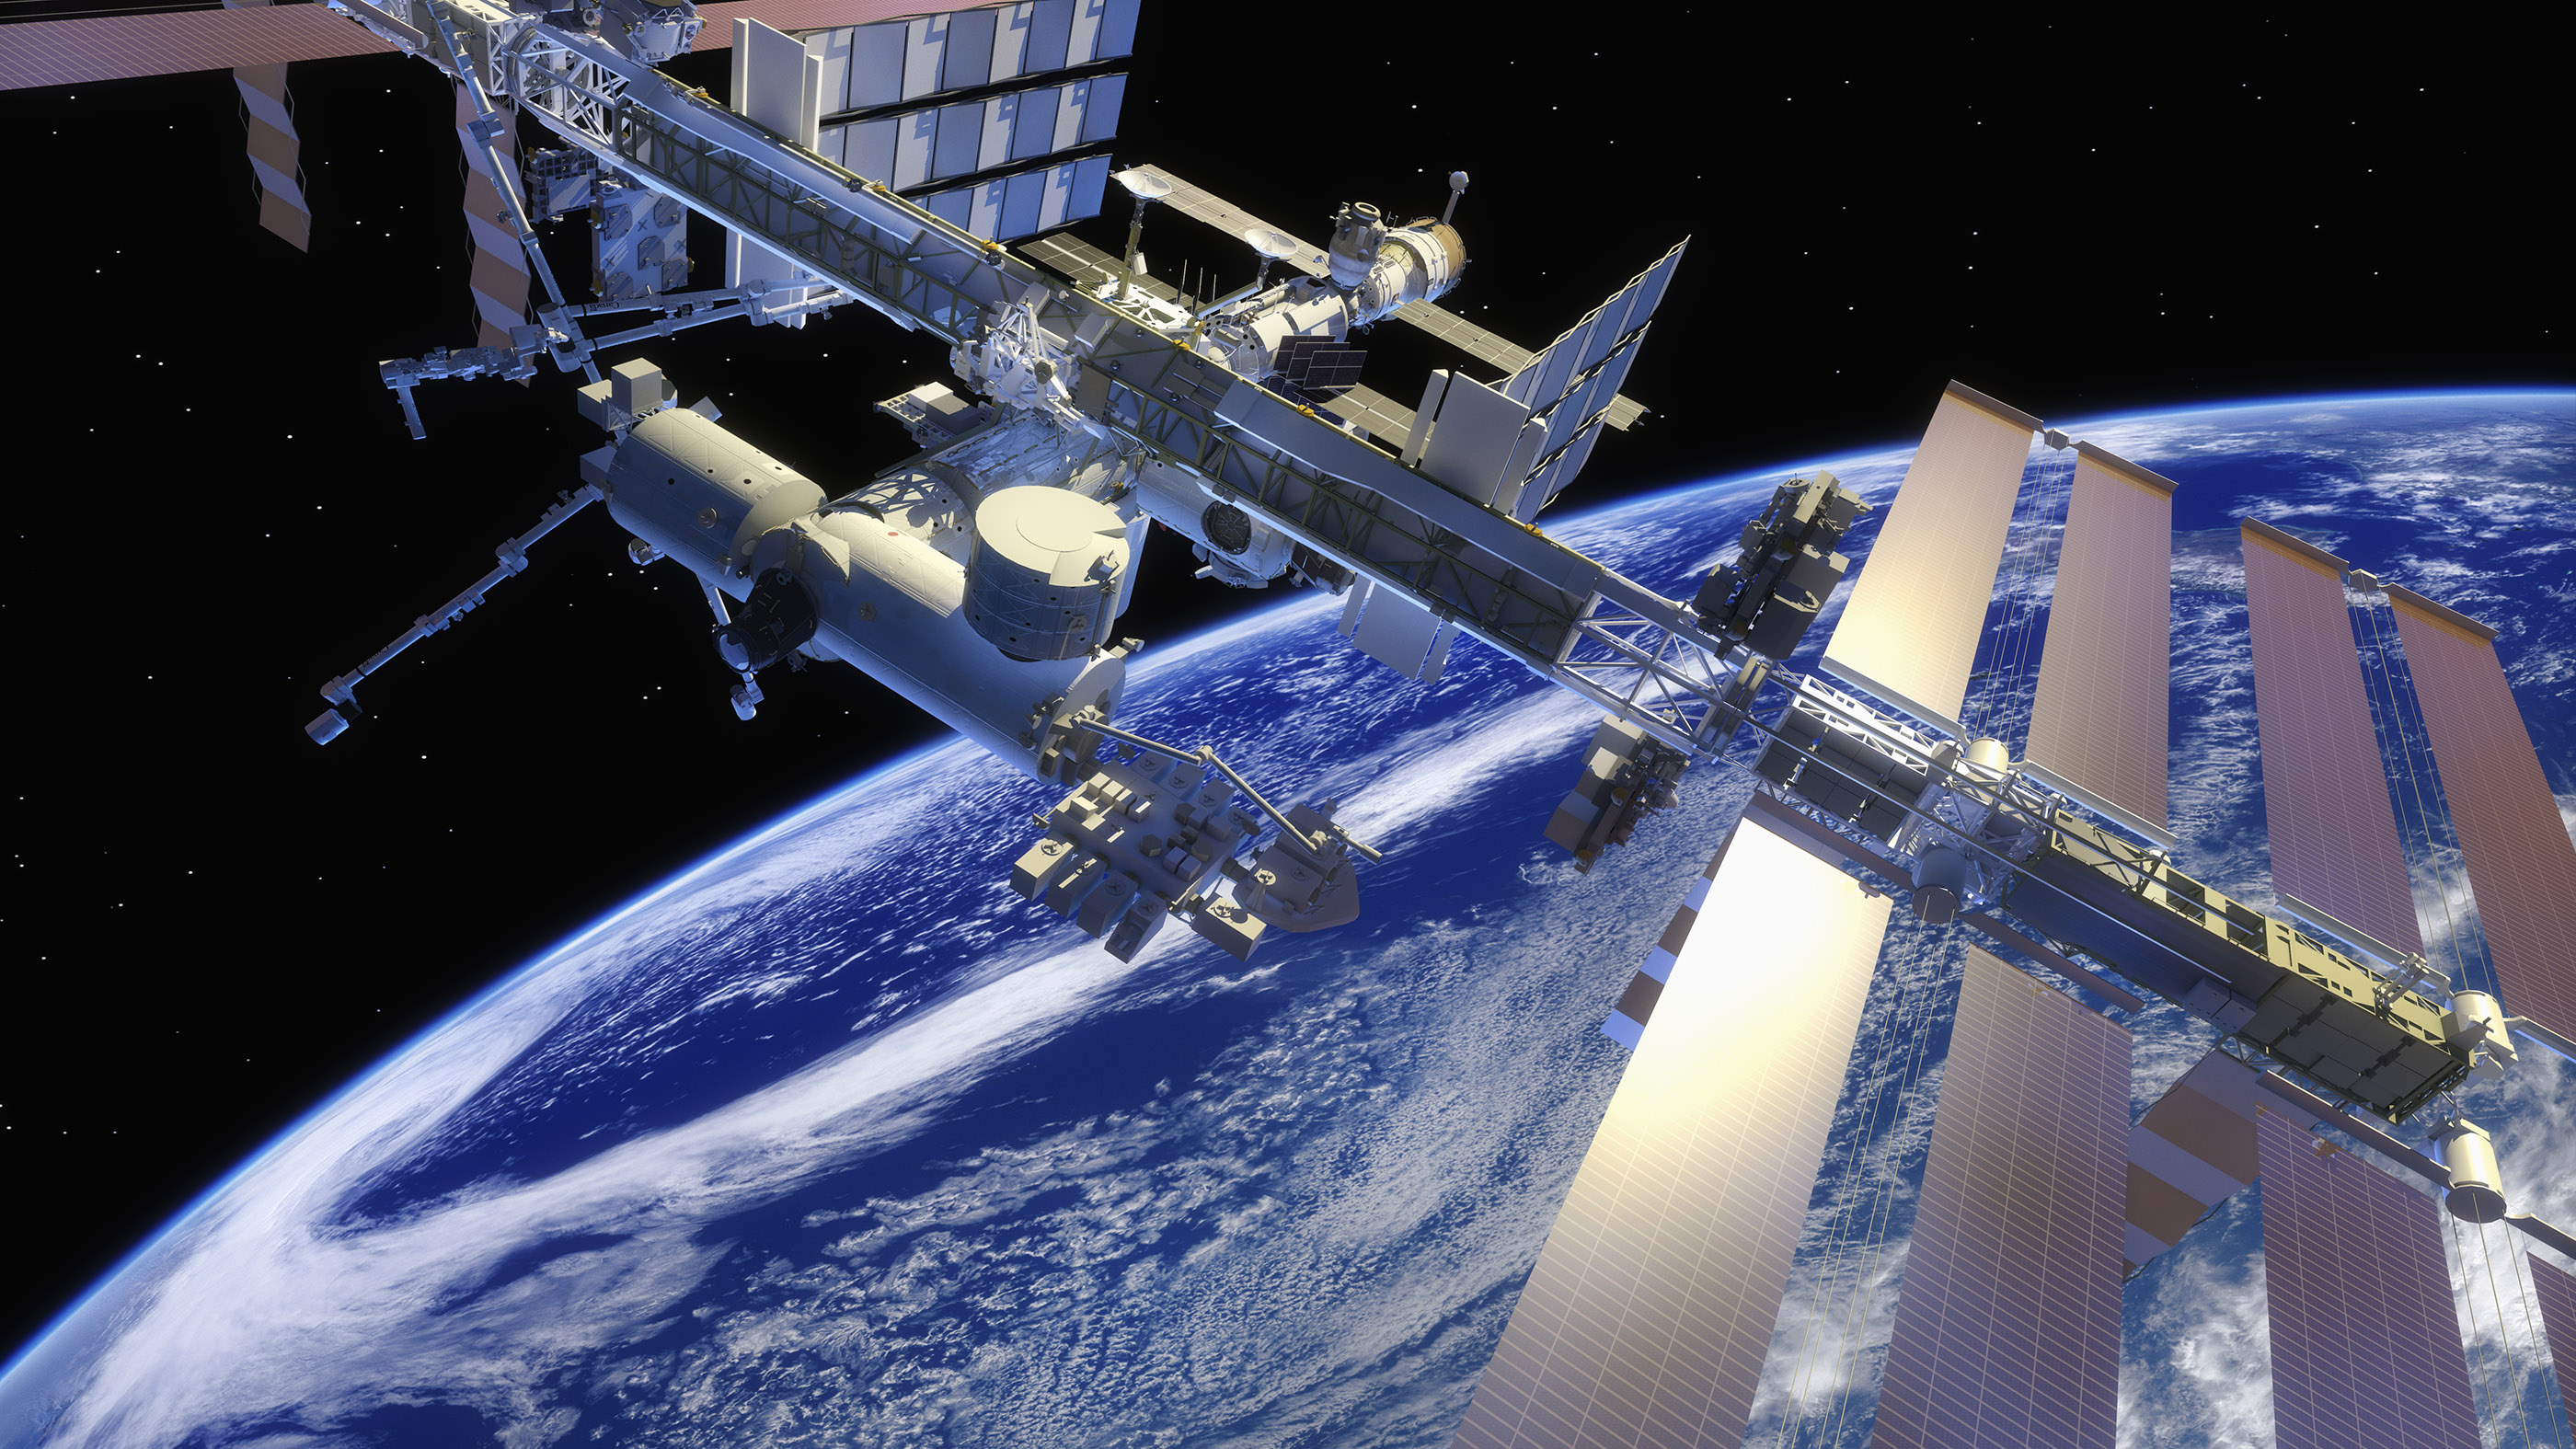 The International Space Station will plunge into the sea in 2031, NASA announces thumbnail